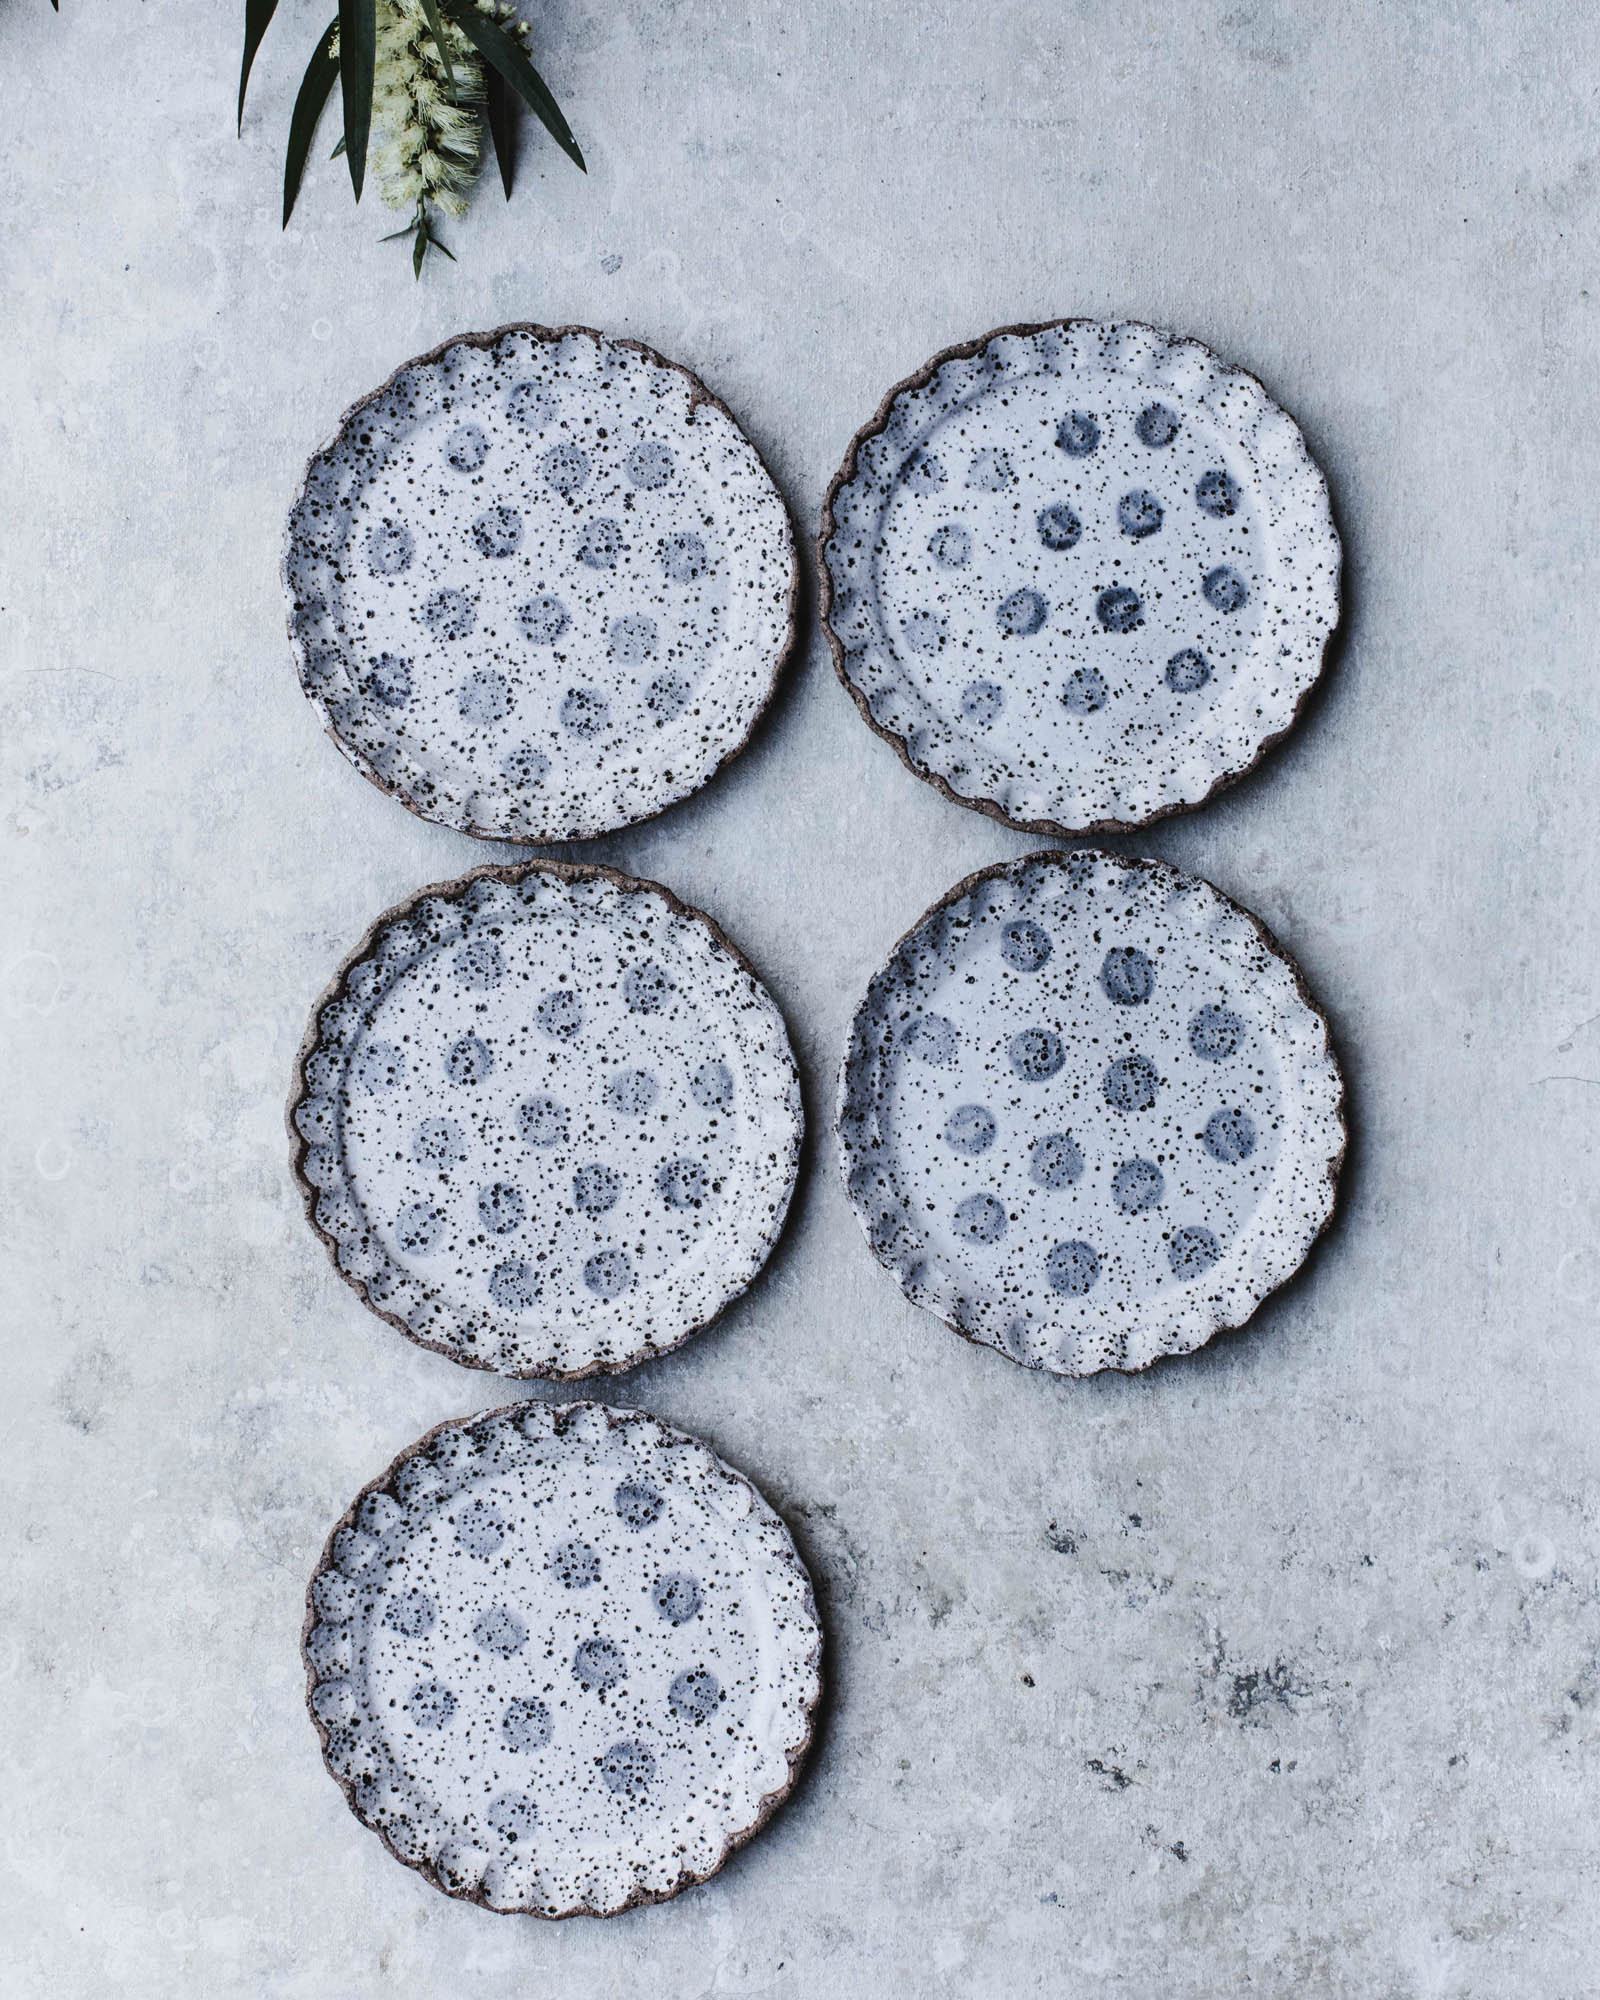 Pretty Gritty rustic cake plates 15cm with polka dots handmade by clay beehive ceramics